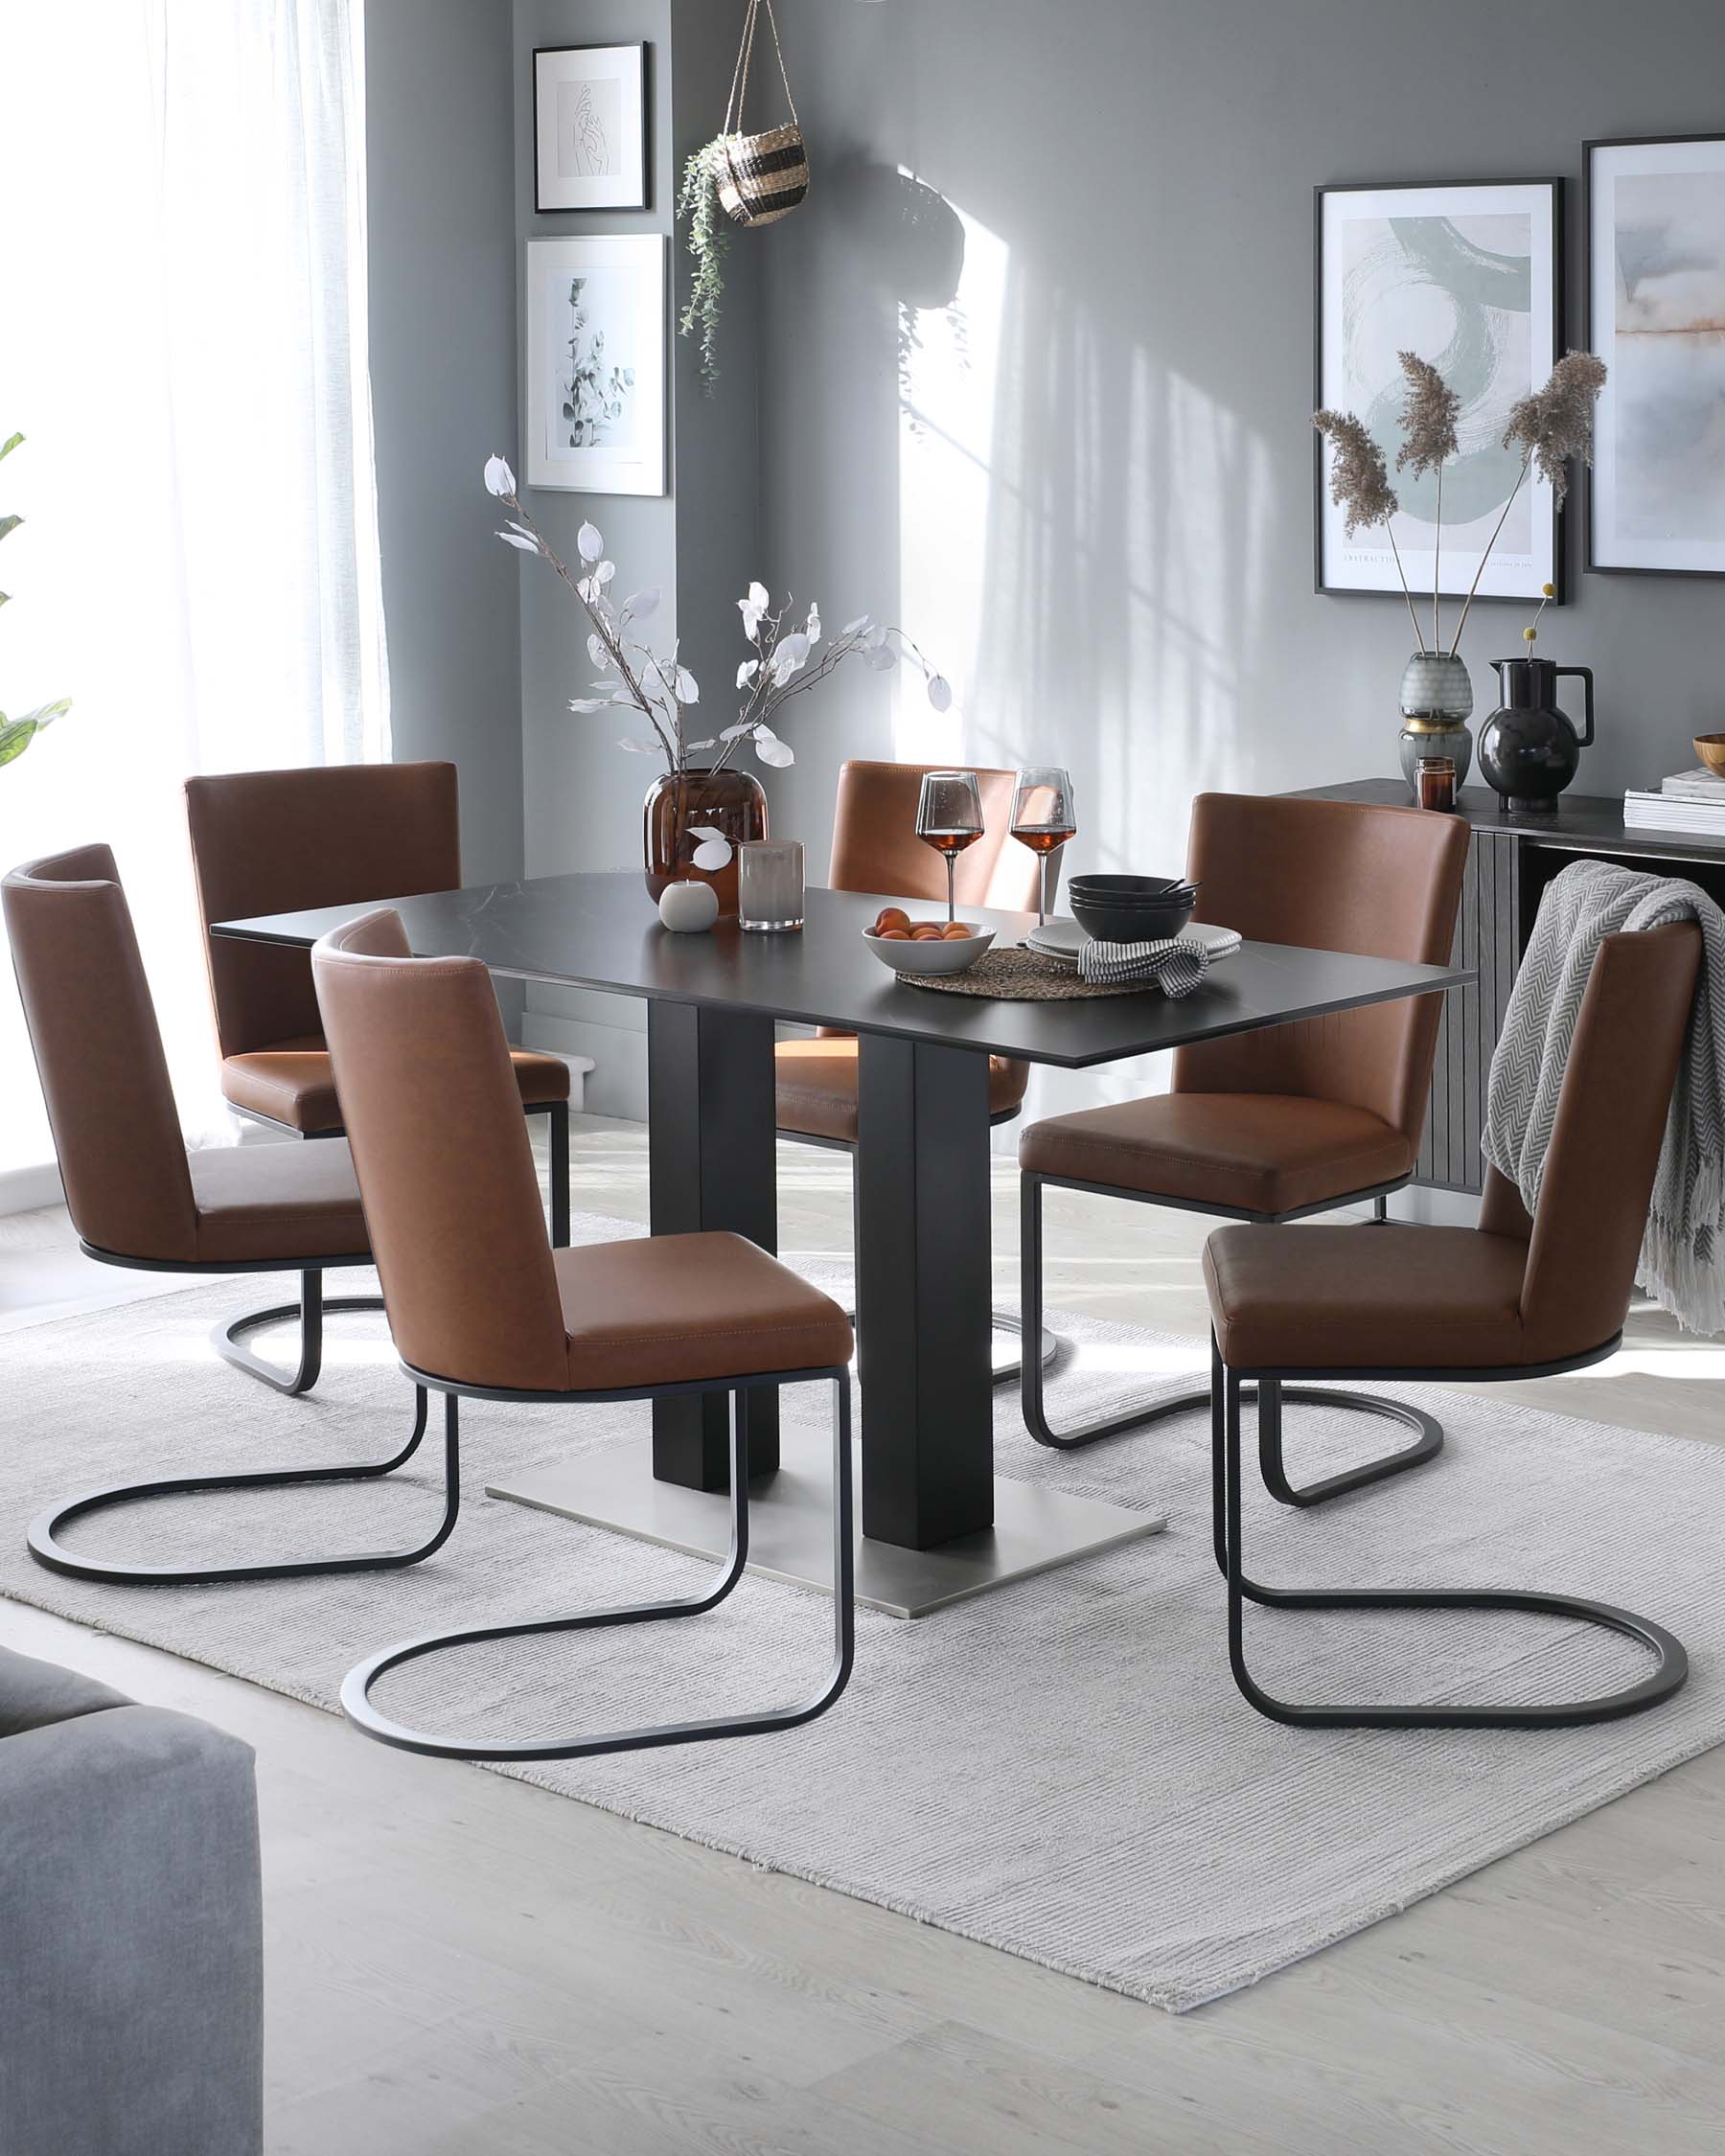 Mia Black Ceramic and Form Tan Faux Leather Dining Set